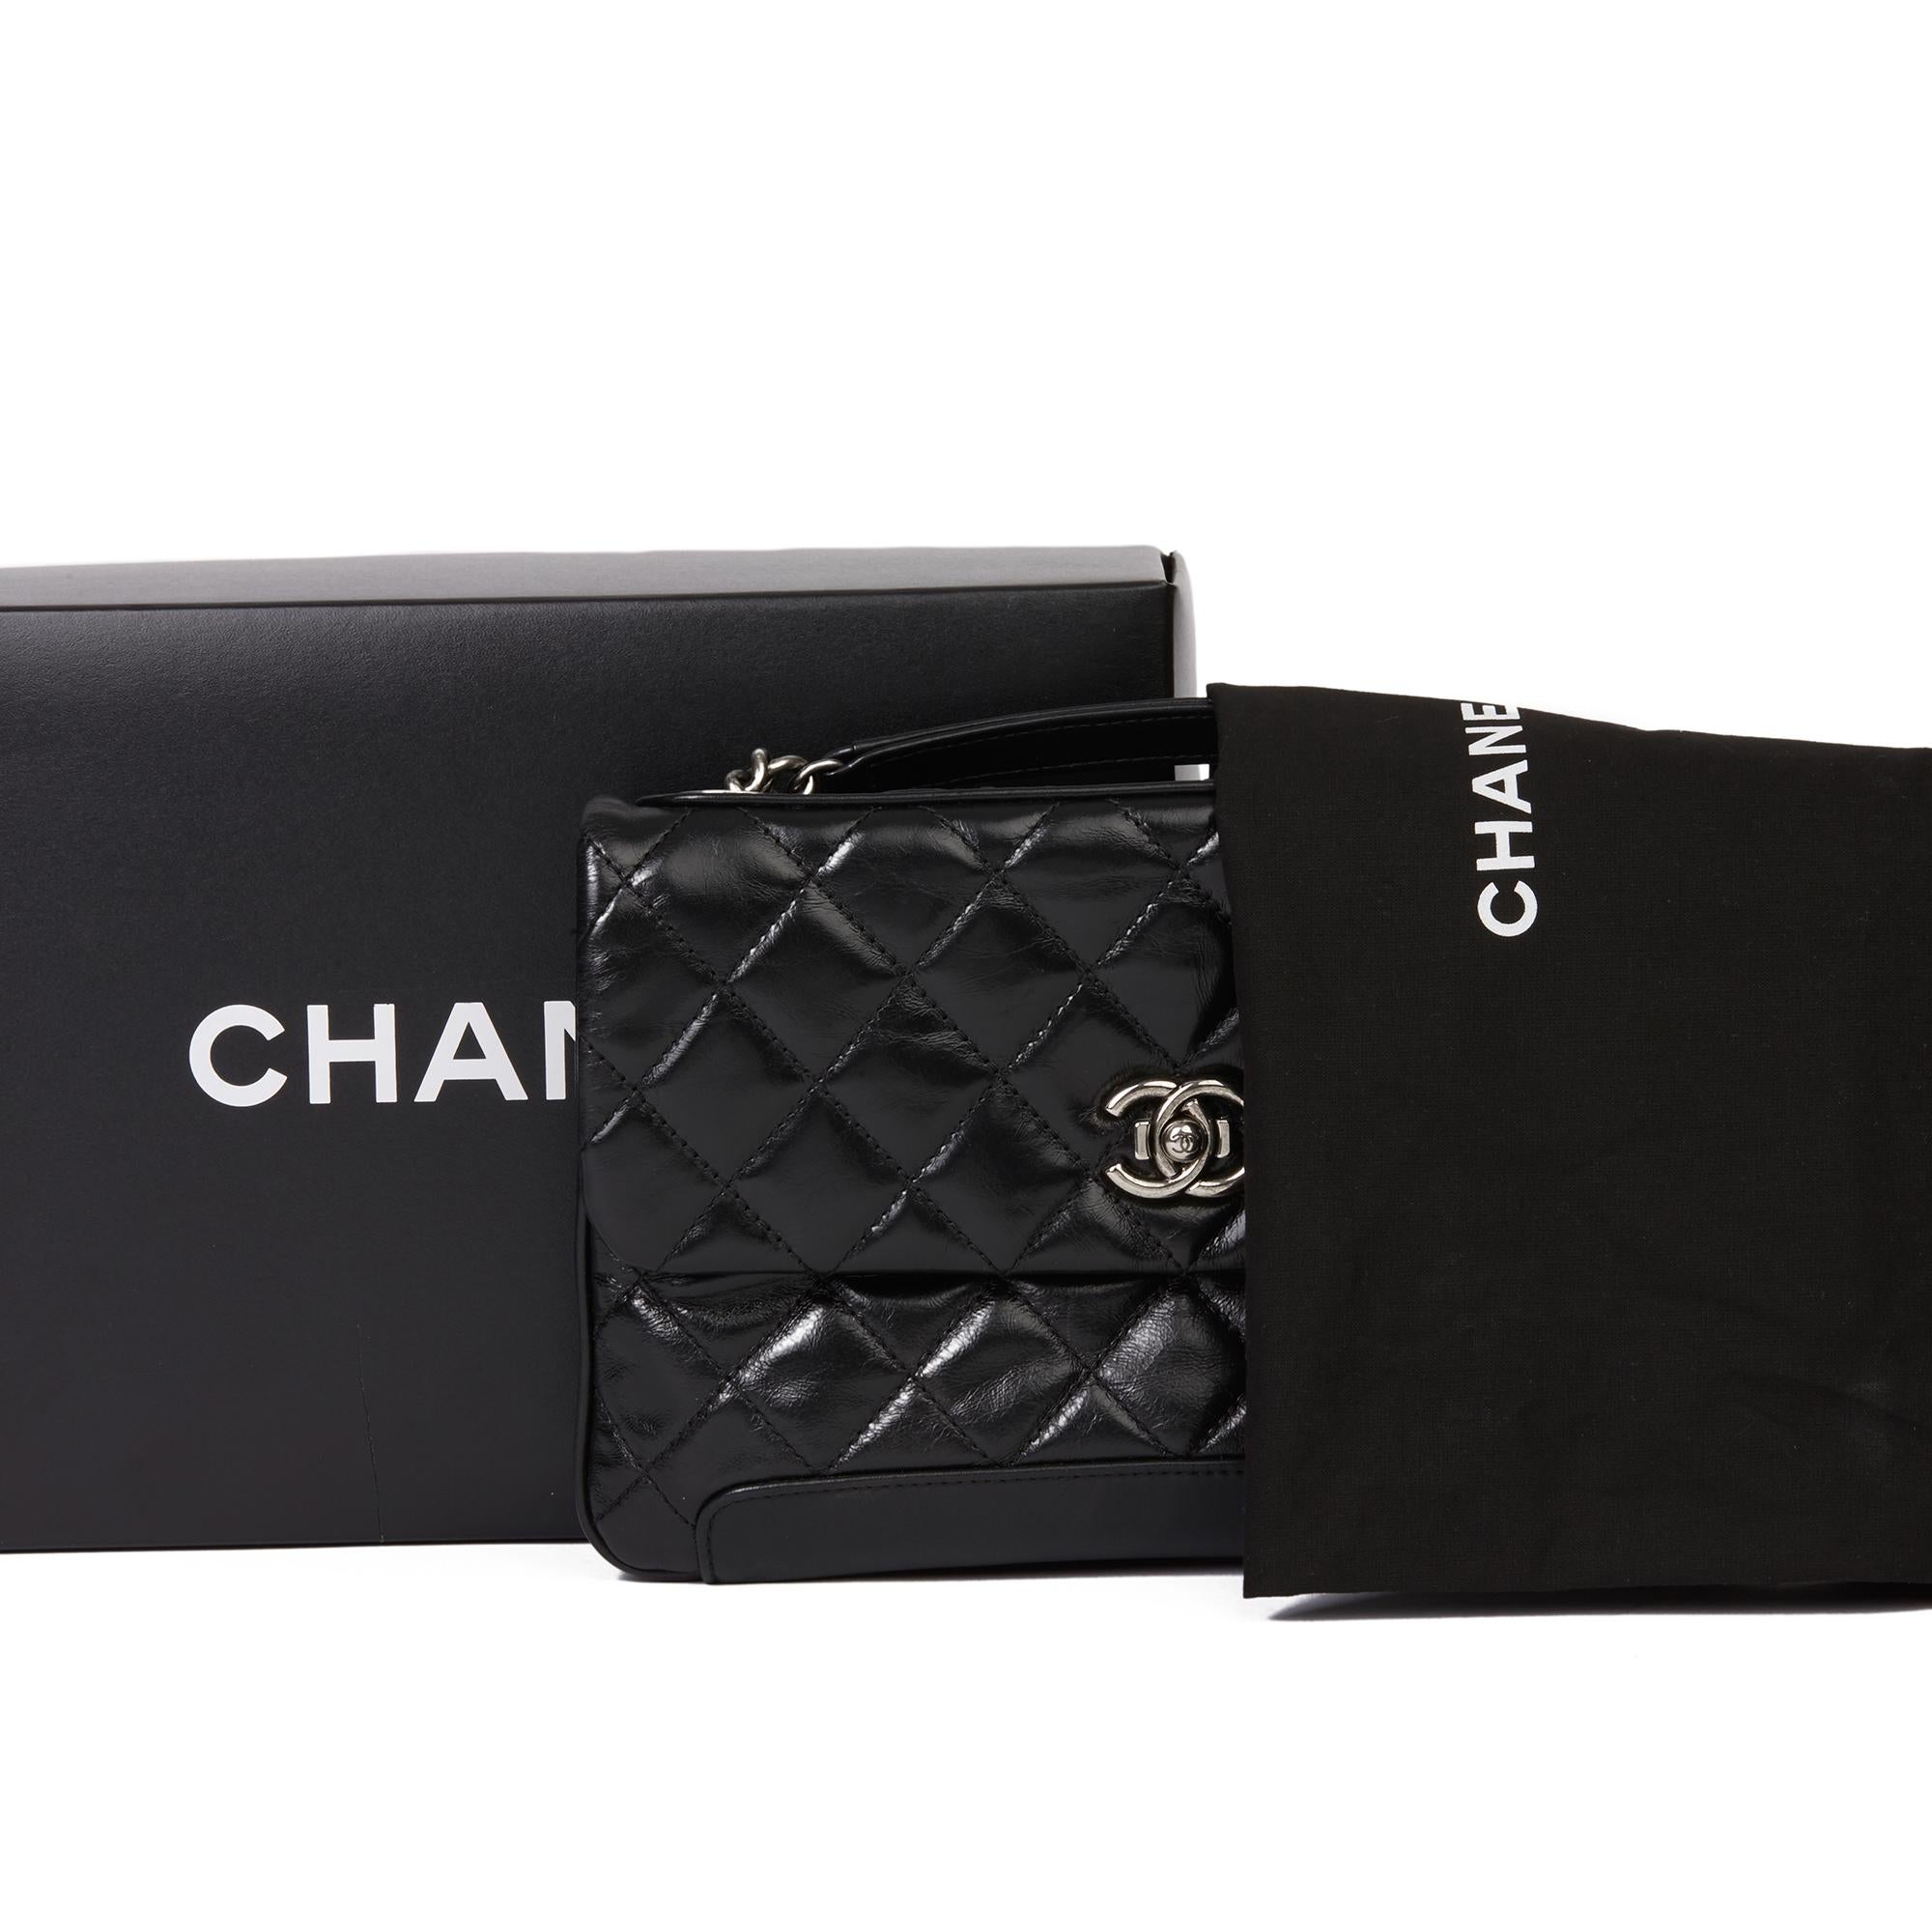 2013 Chanel Black Quilted Glazed Calfskin Leather Classic Single Flap Bag 6